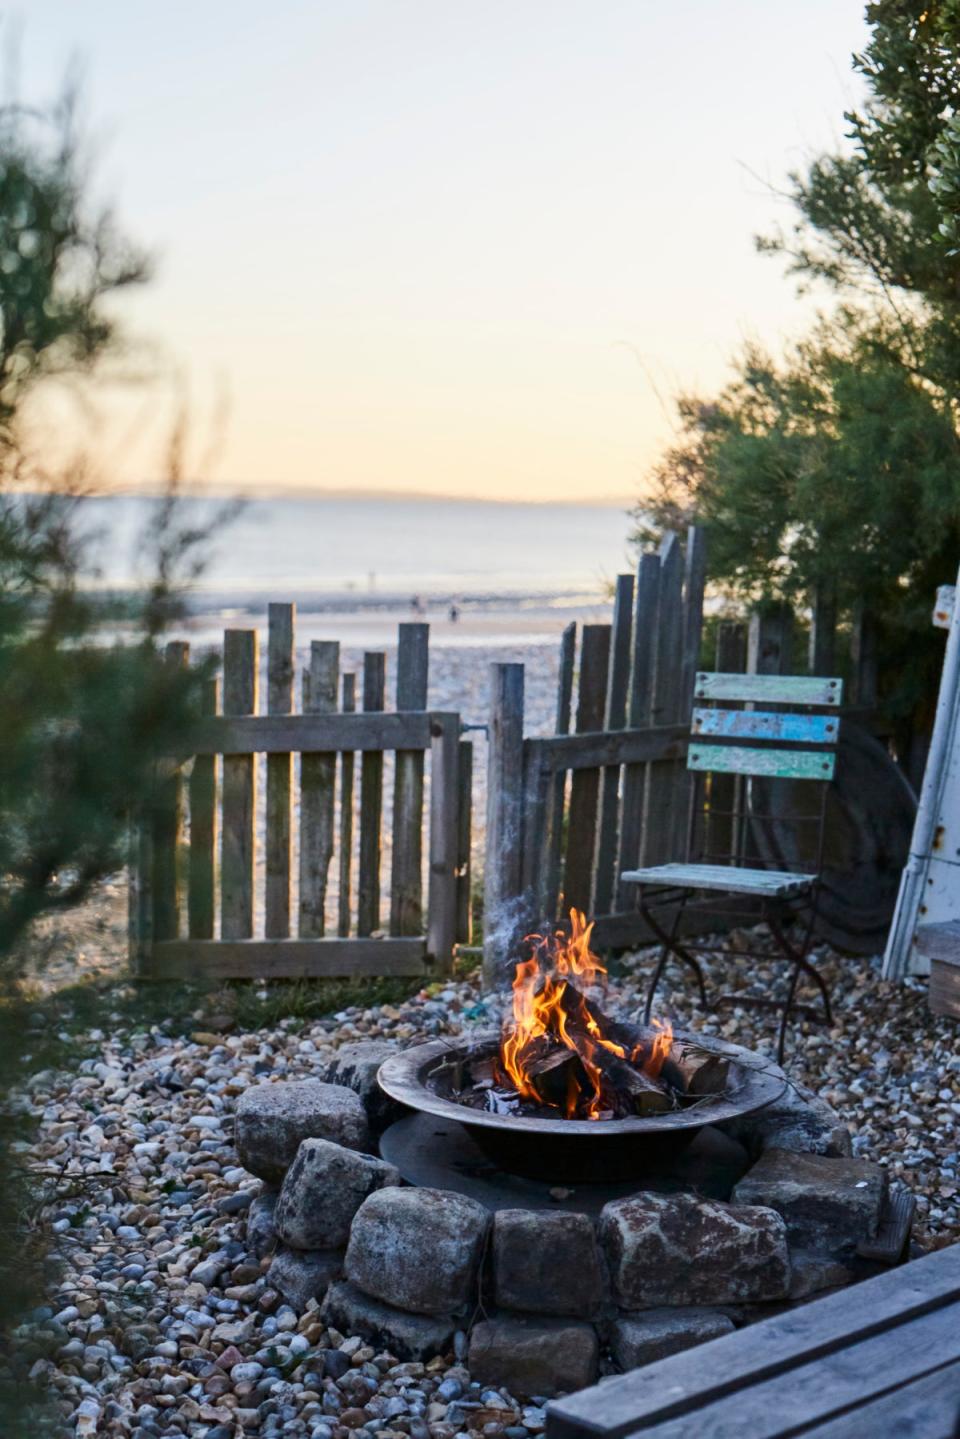 The house also has a fire pit and leads directly onto the beach (Rita Platts)